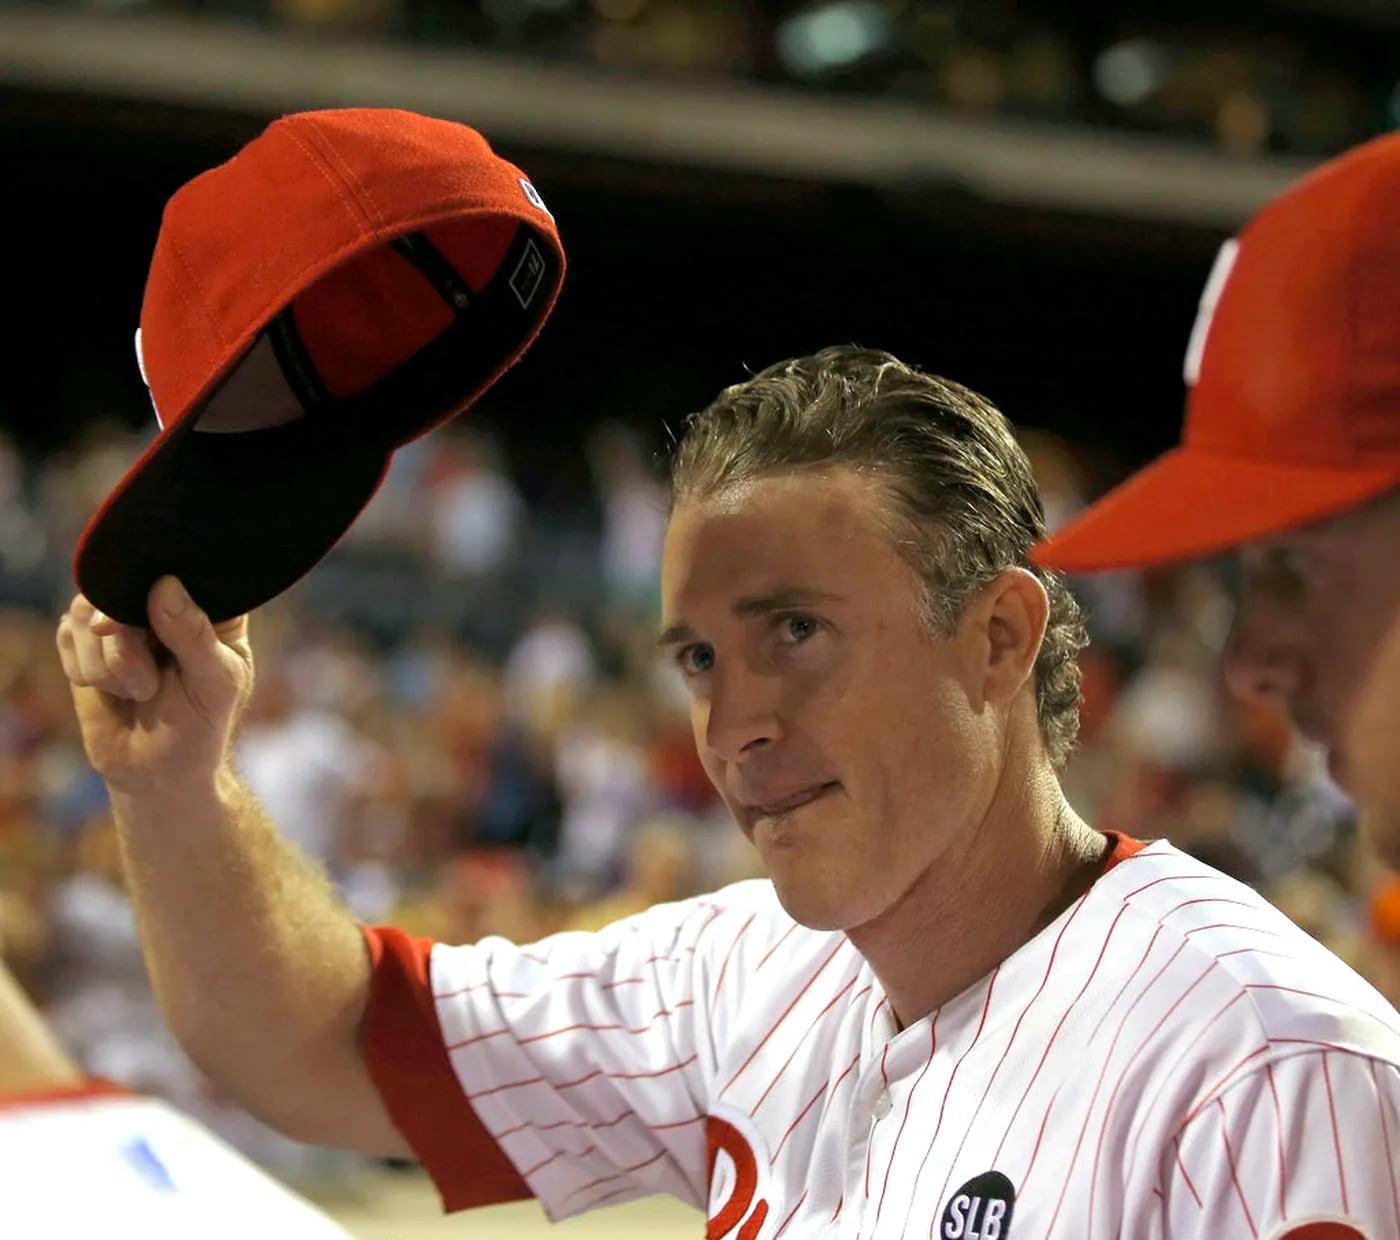 Chase Utley retirement: Will slugger reach Hall of Fame? - Sports